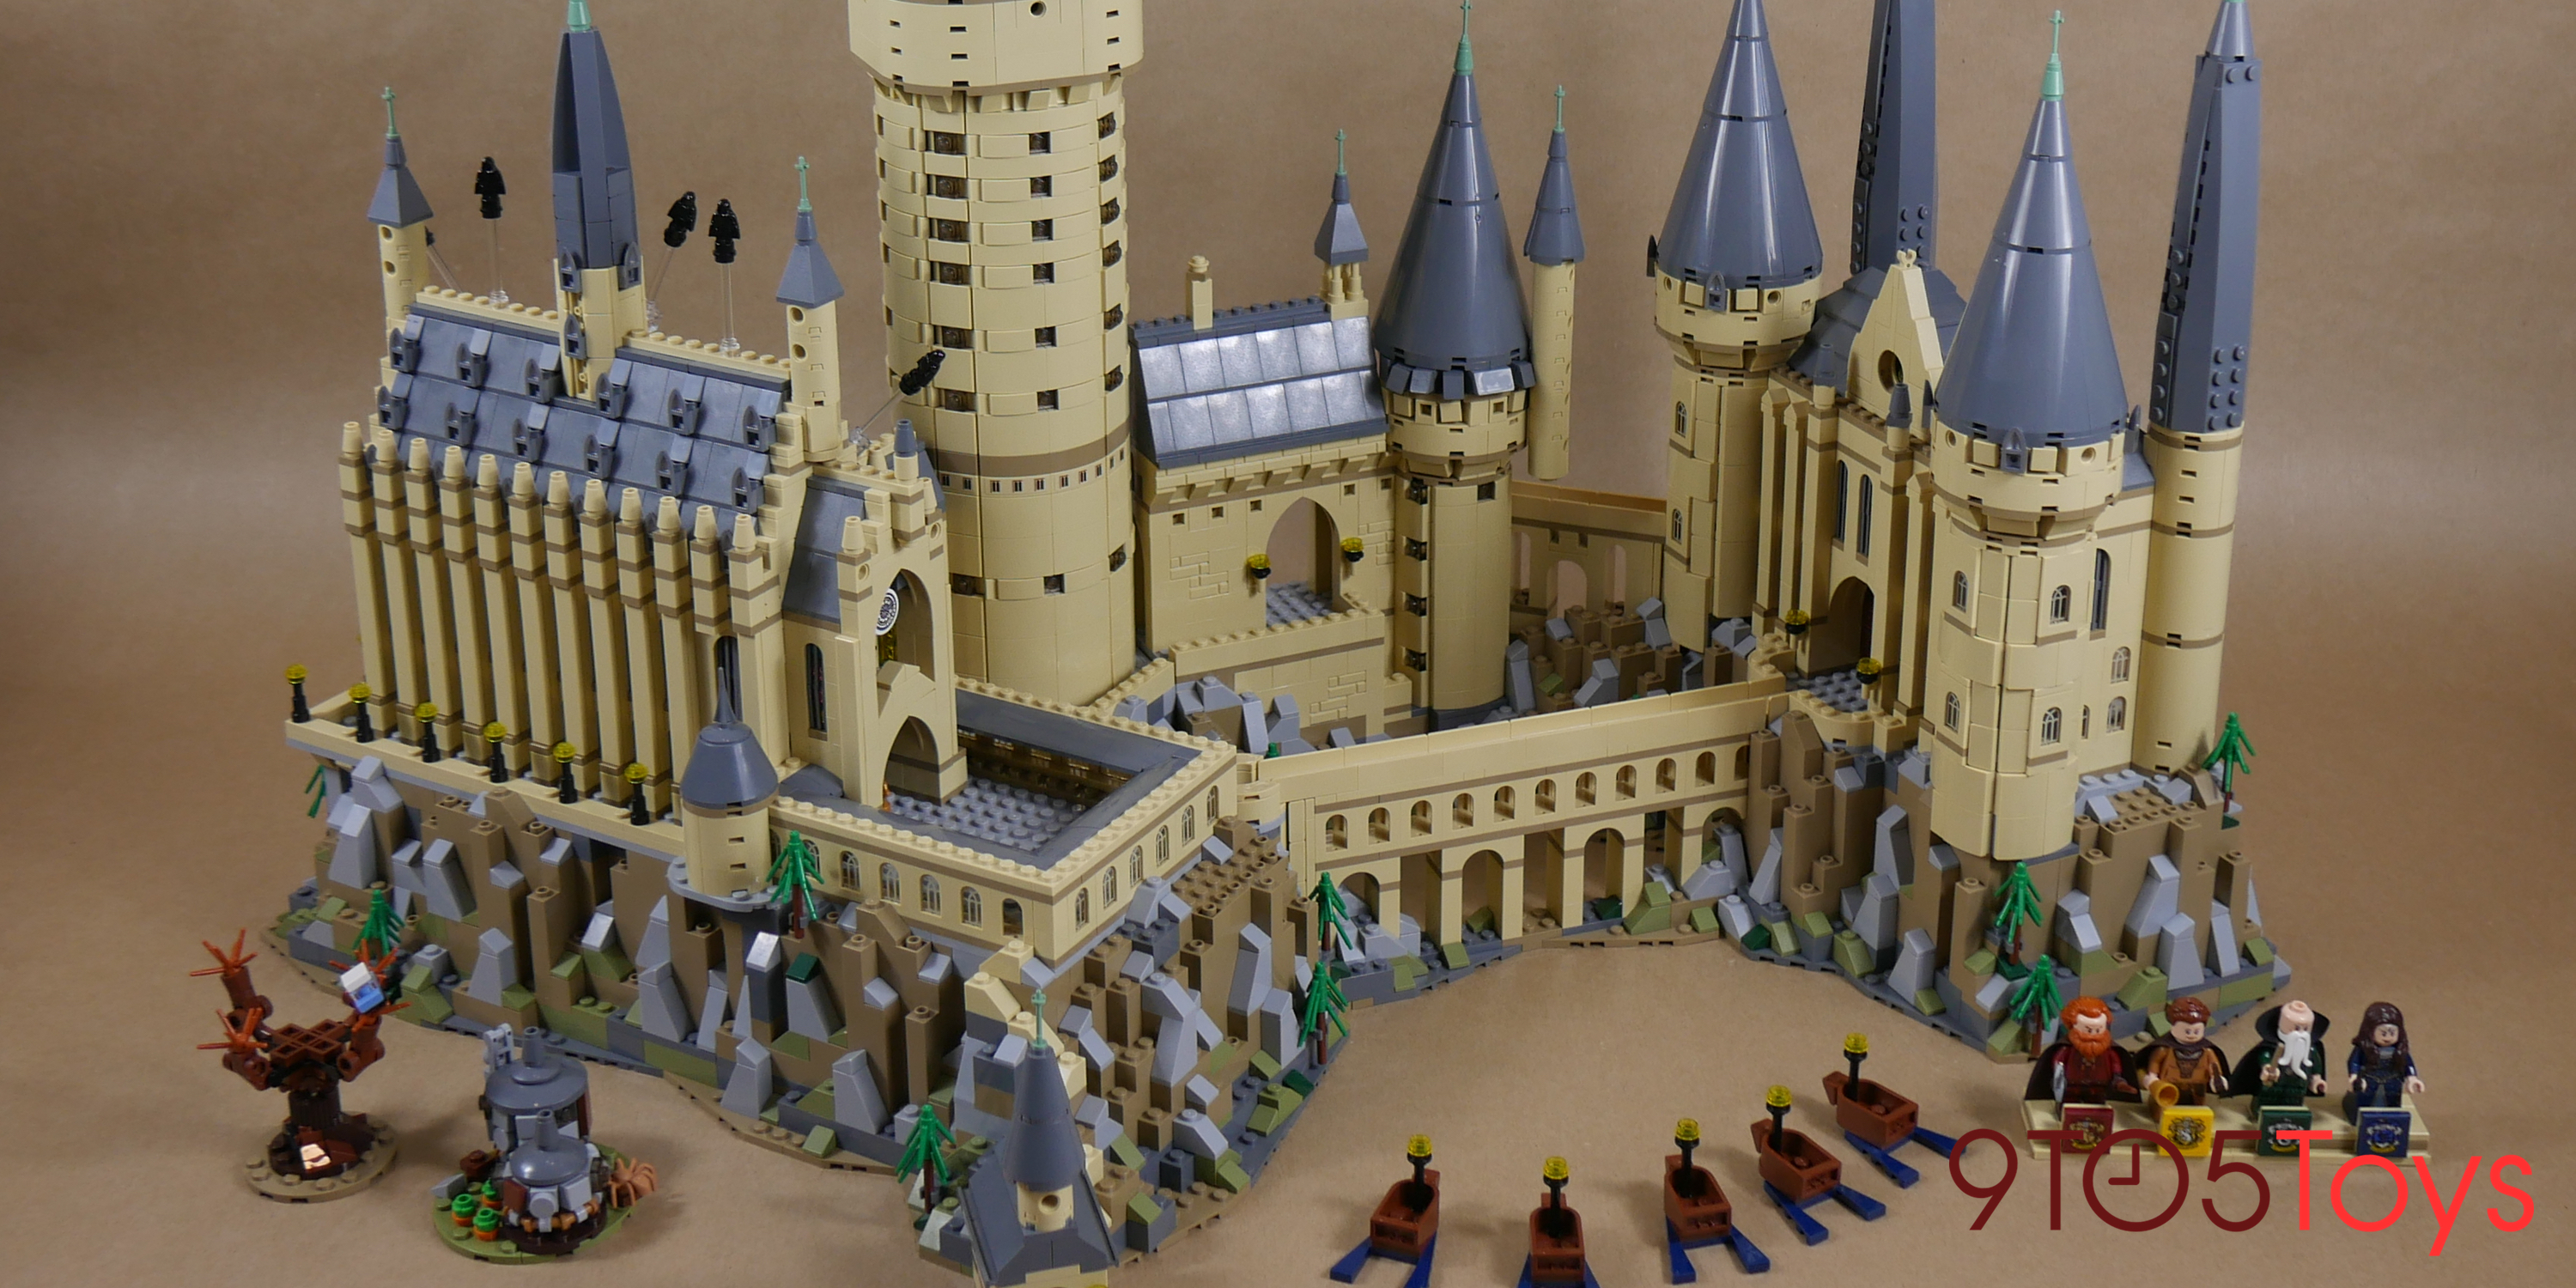 LEGO Hogwarts Castle The 2nd largest in reigns supreme over all